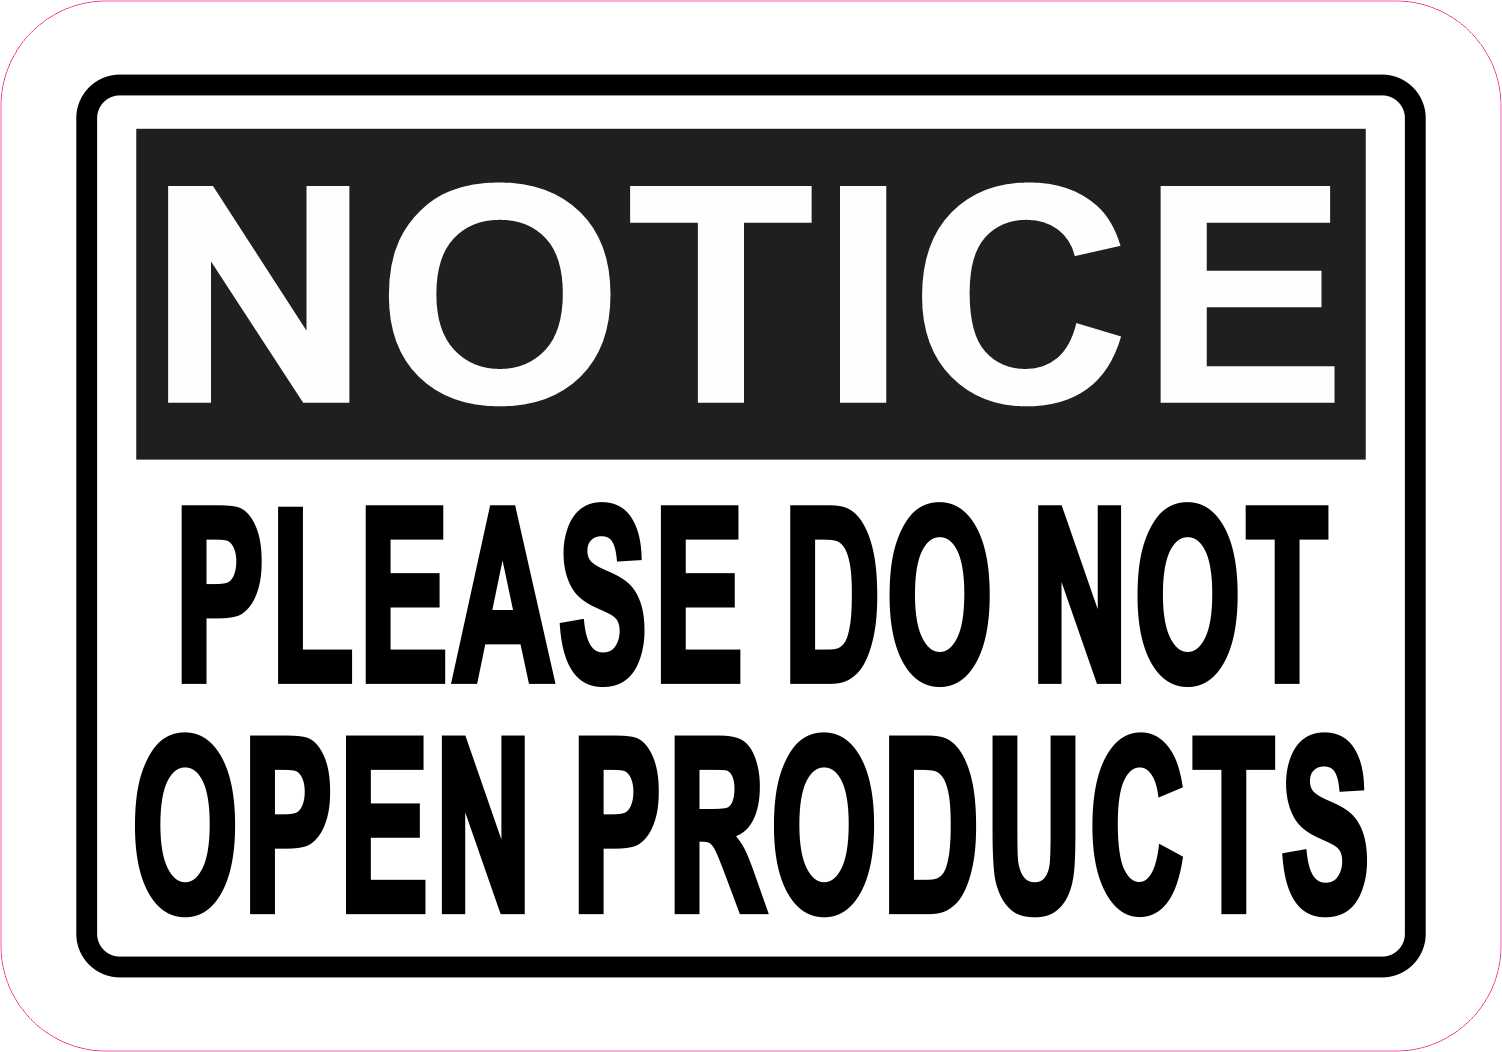 5in-x-3-5in-please-do-not-open-products-vinyl-sticker-business-sign-decal-ebay